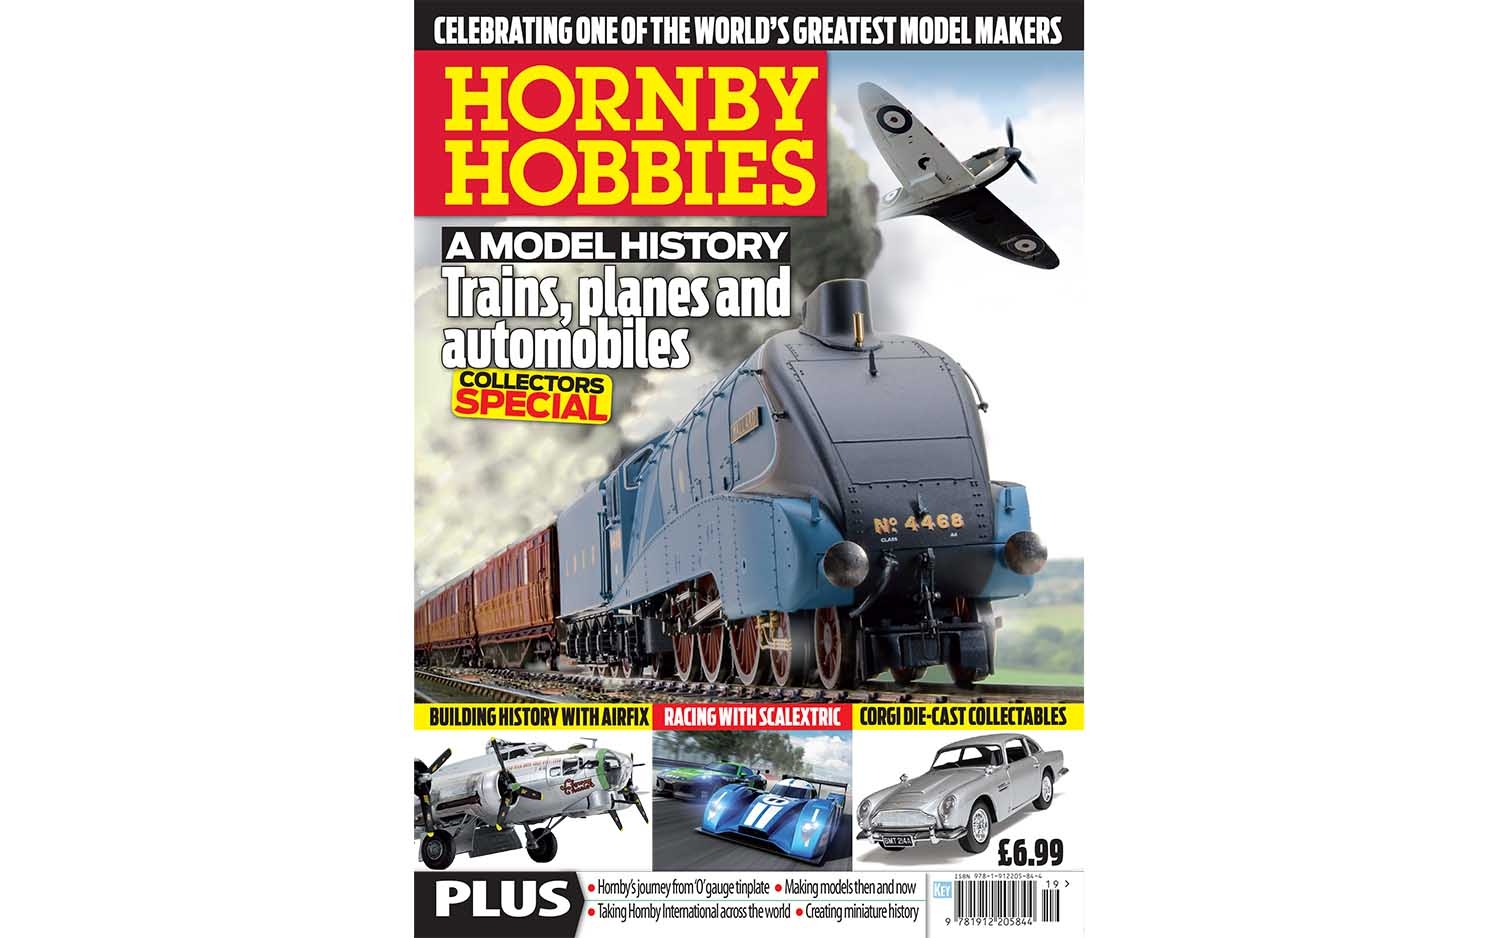 Hornby Hobbies - A Model History